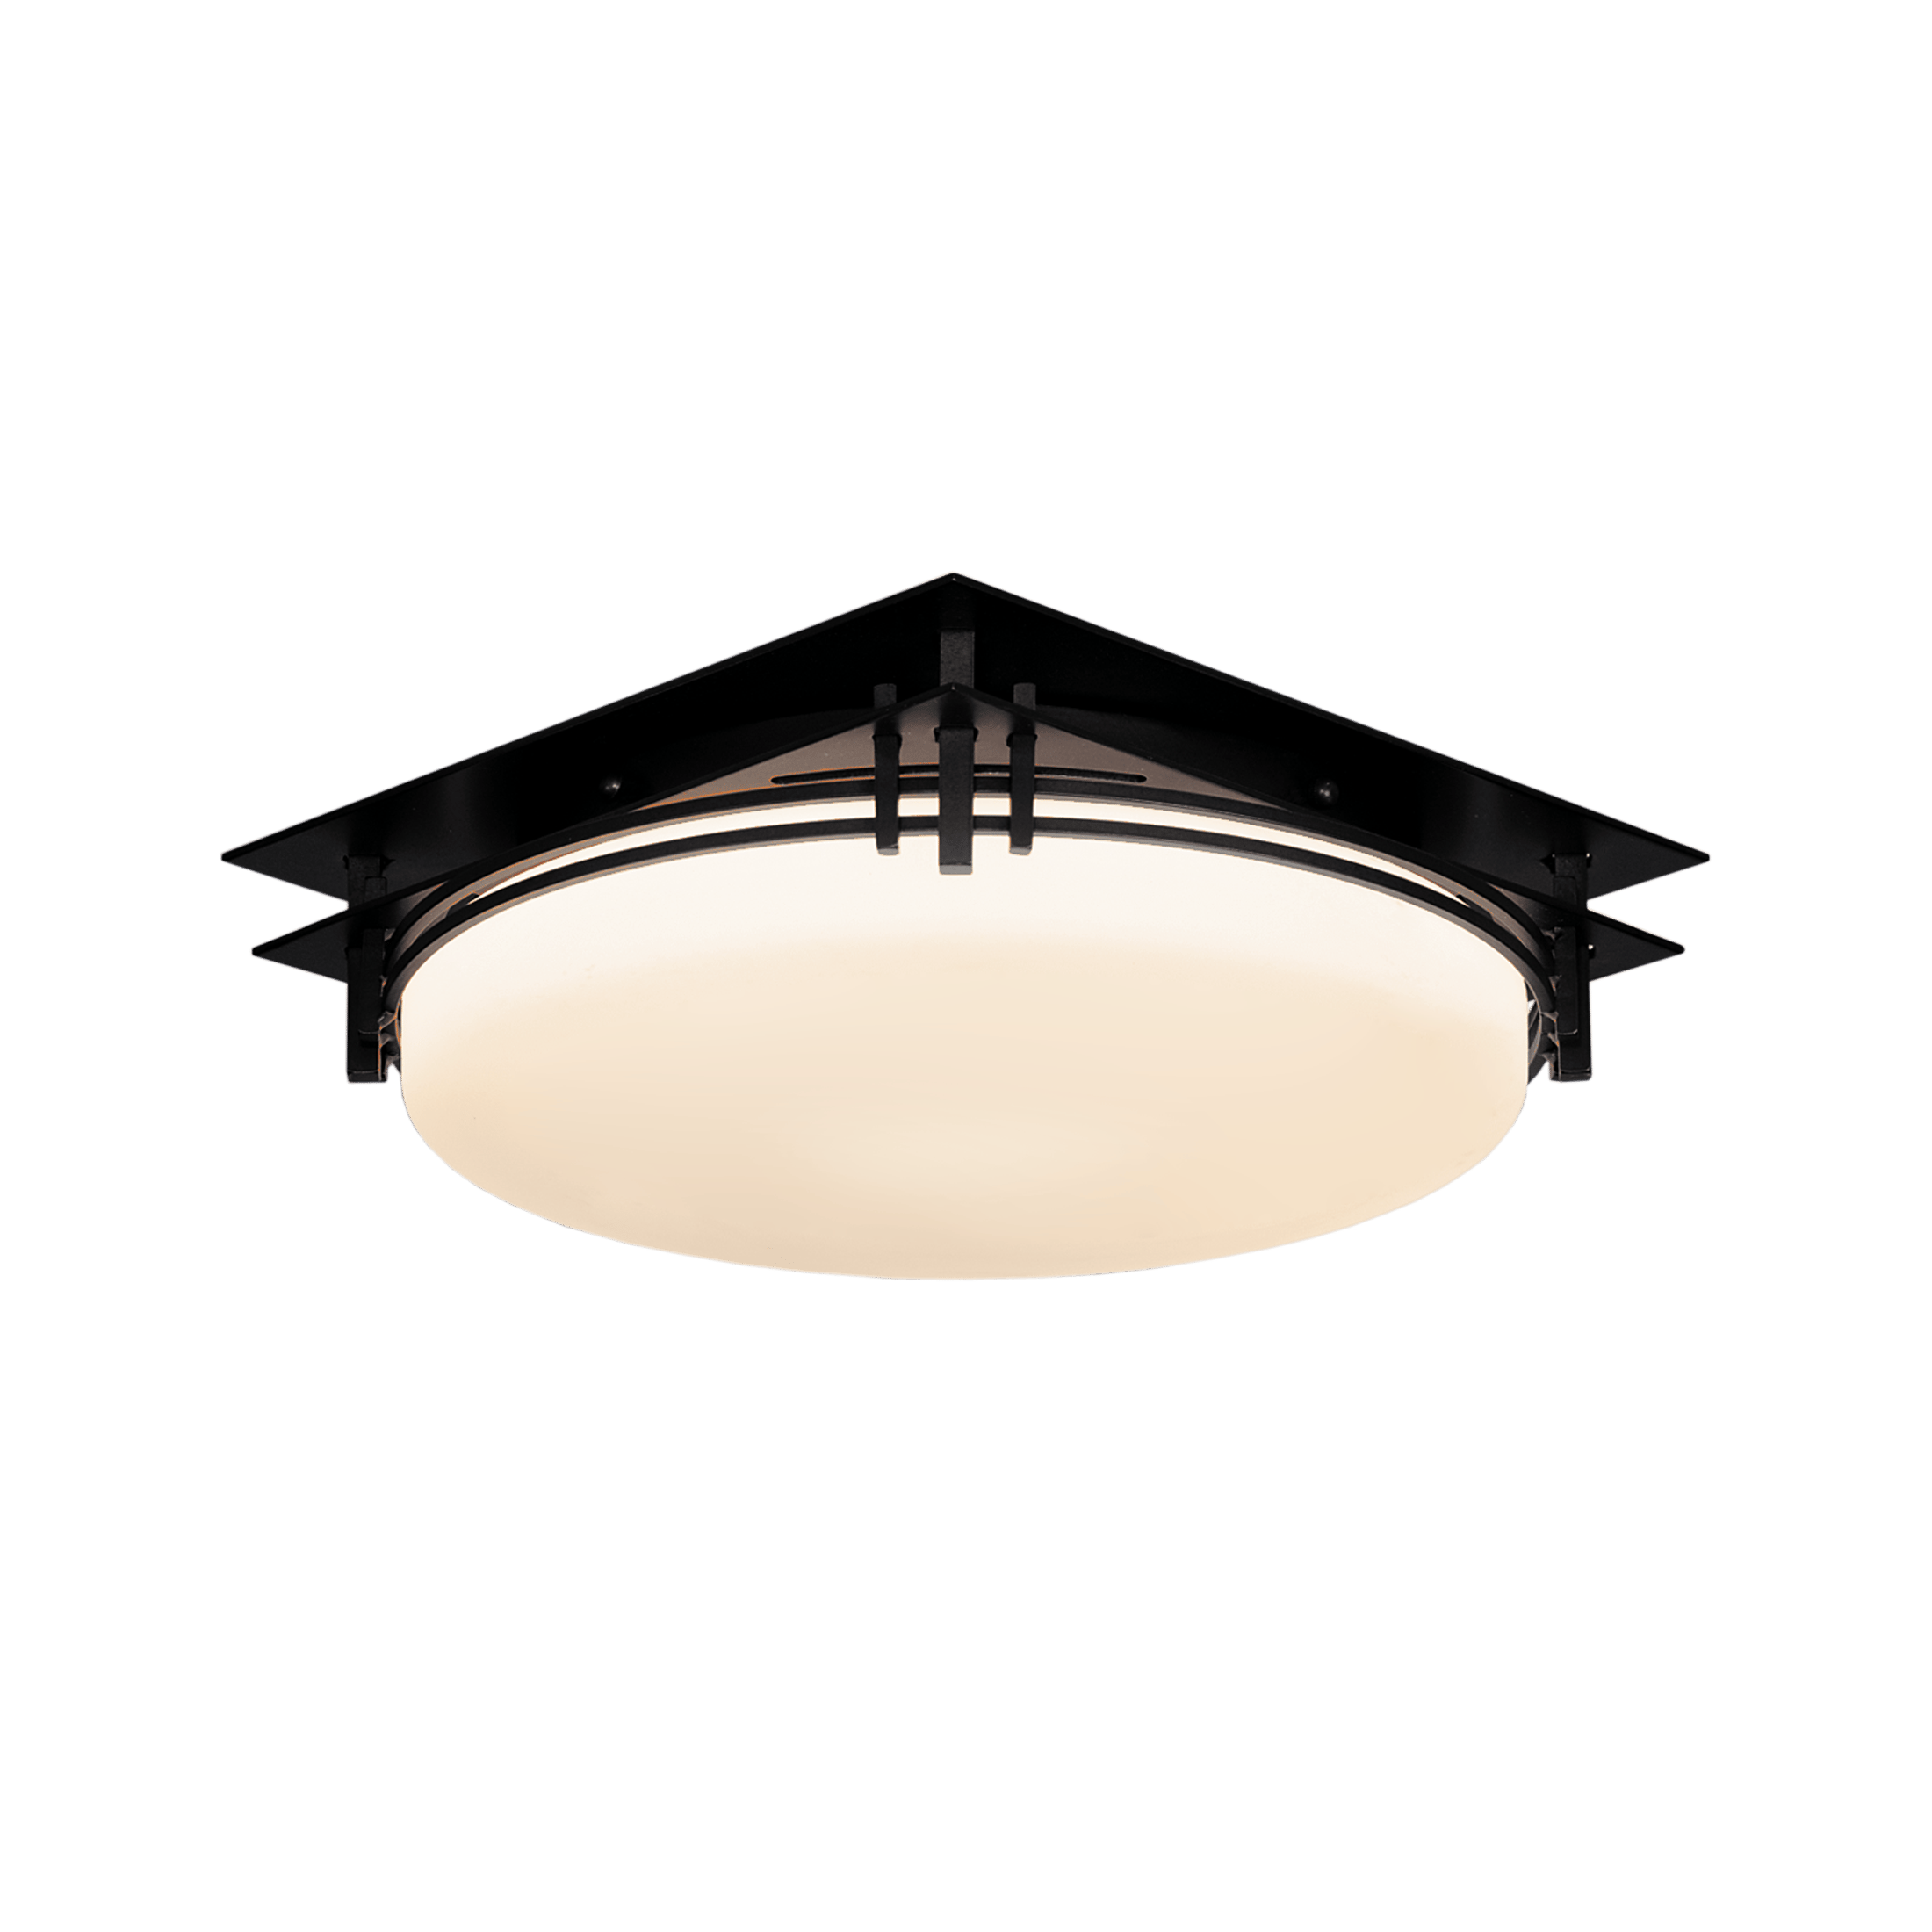 https://hubbardtonforge.com/cdn-cgi/image/width=,height=,quality=85,format=auto/media/catalog/product/1/2/124394-SKT-10-GG0097_1_3.png?auto=webp&format=png&fit=cover